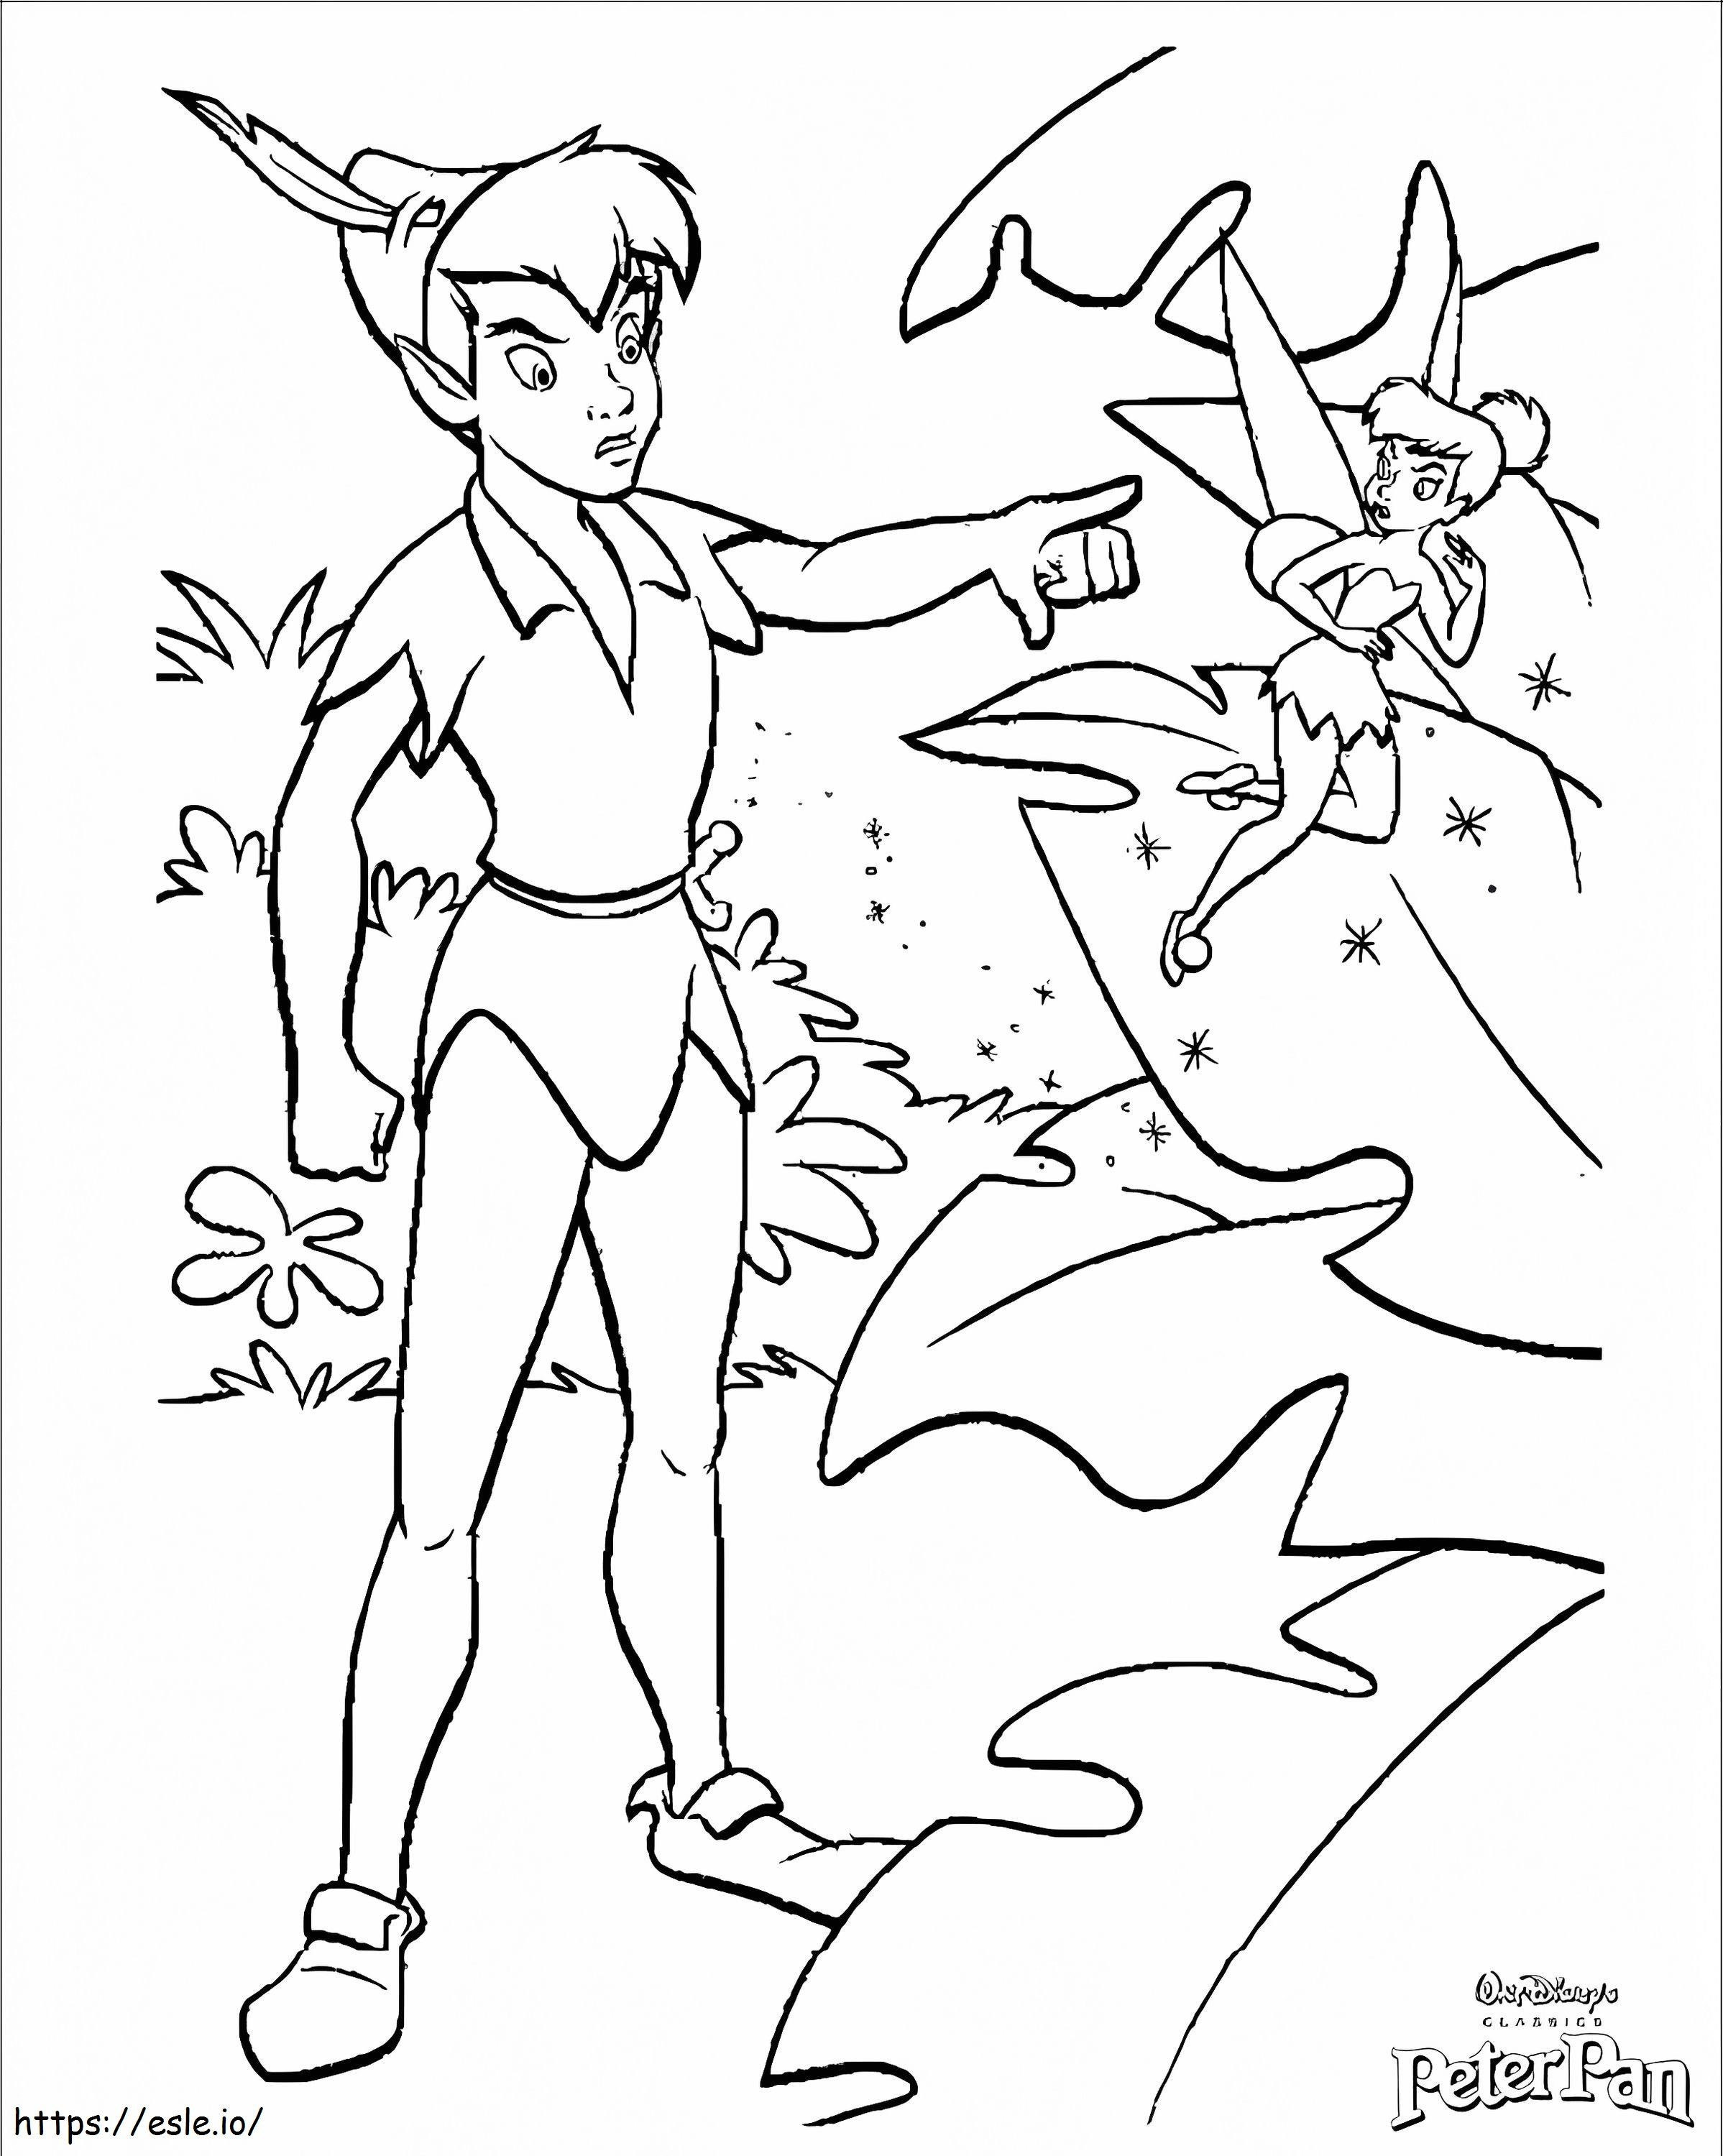 Peter Pan Is Upset coloring page